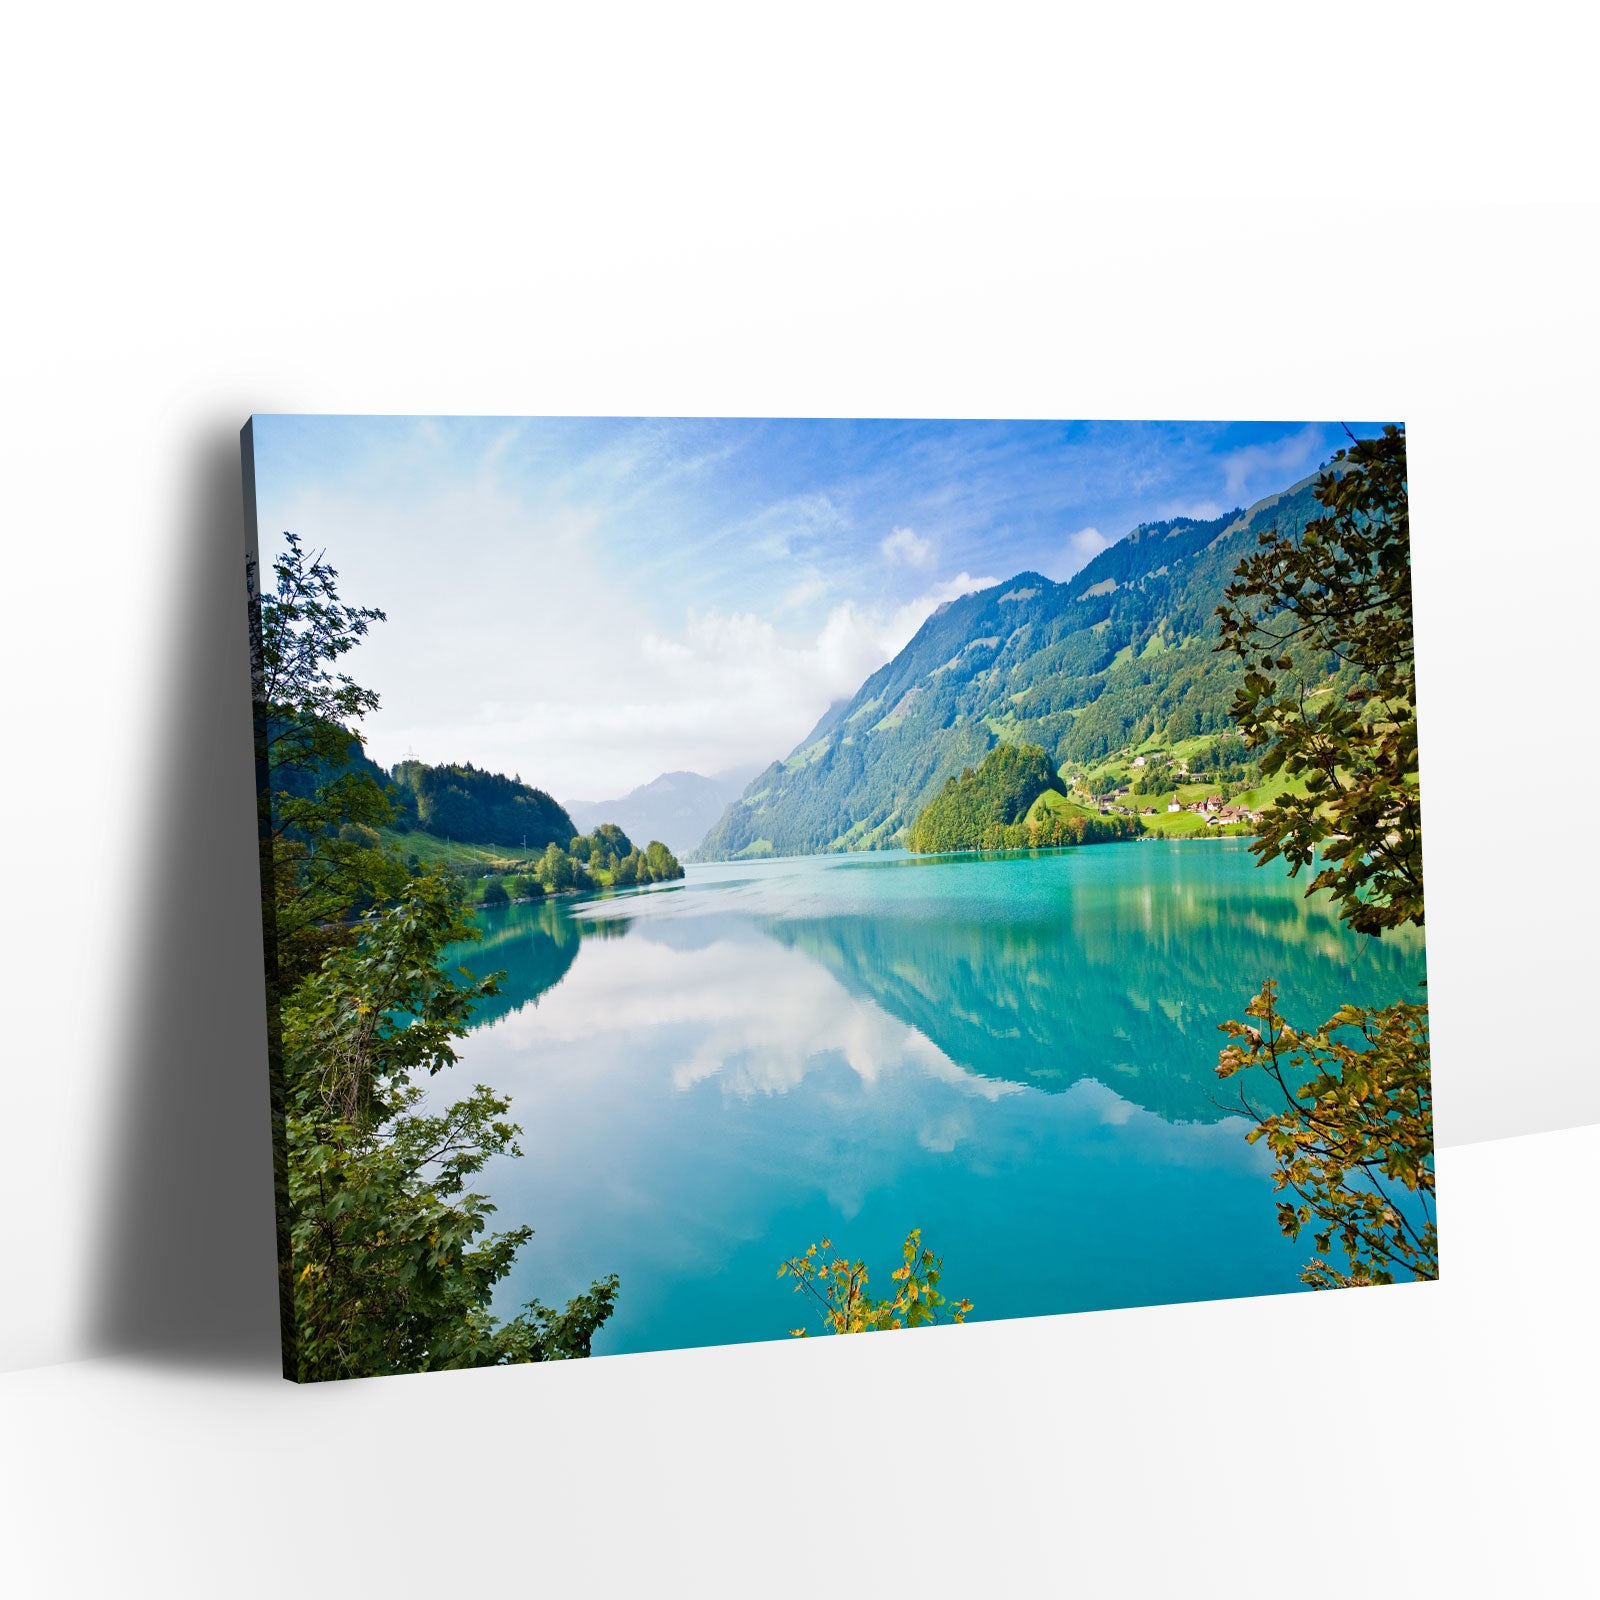 Serenity Lakeview Canvas Wall Art